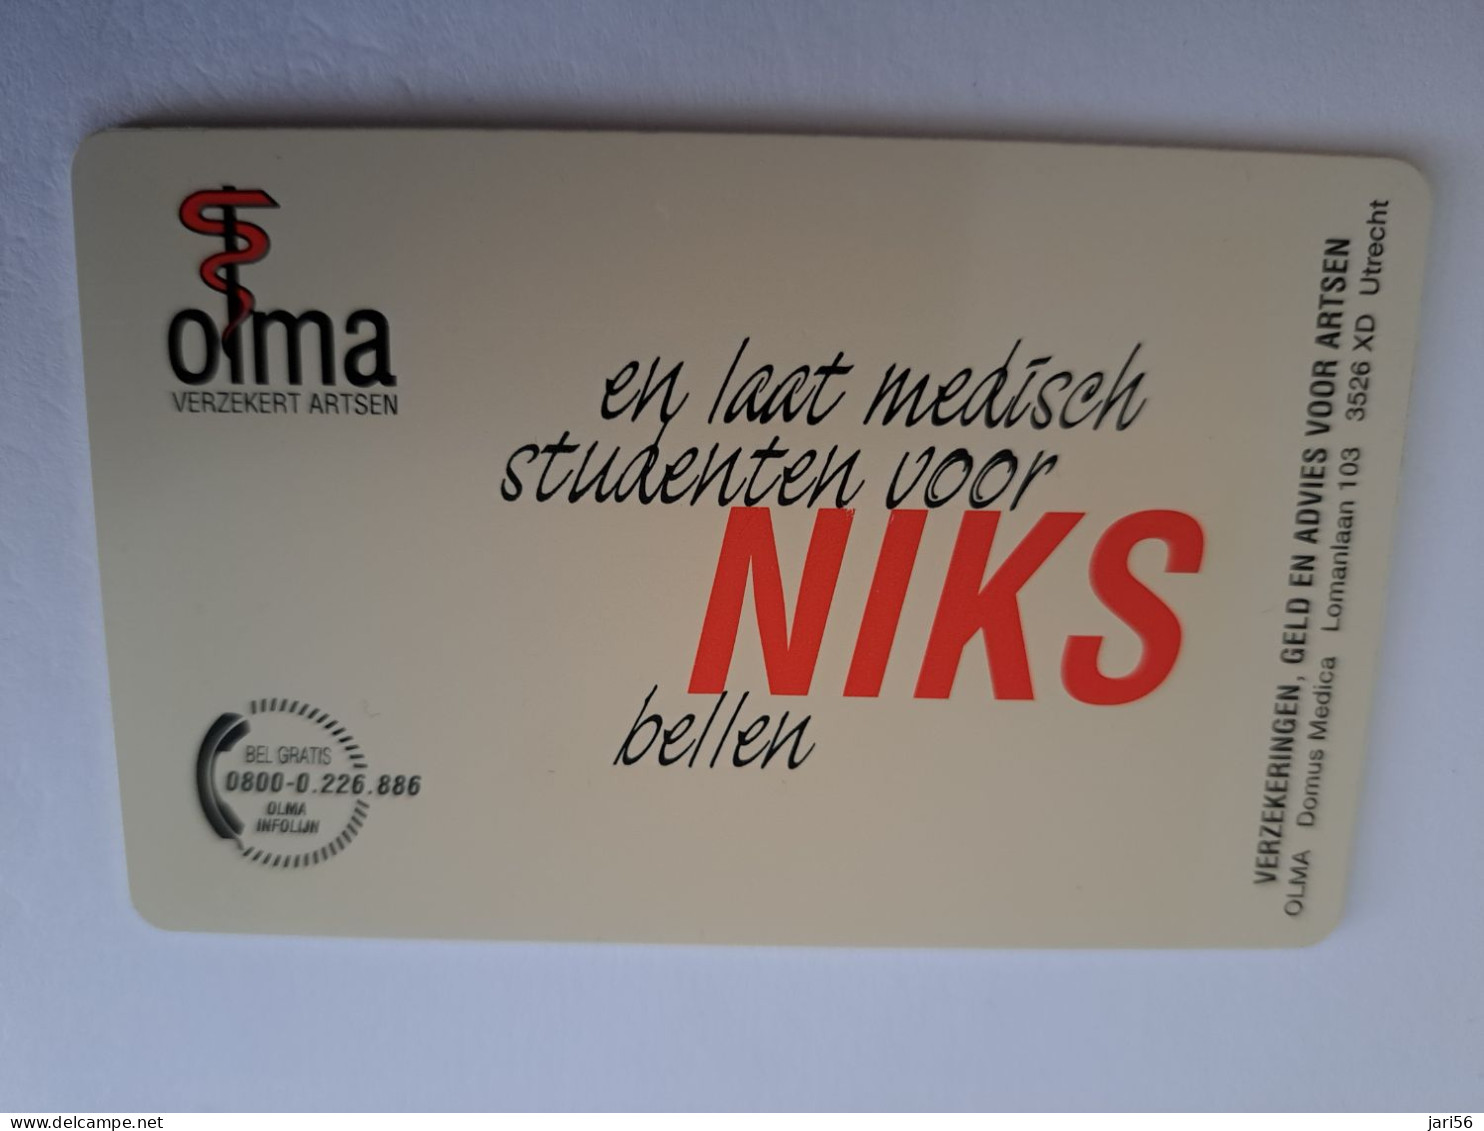 NETHERLANDS / CHIP ADVERTISING CARD/ HFL 5,00  / OLMA/ MEDICAL STUDENTS    /     CRE 451** 14598** - Privadas